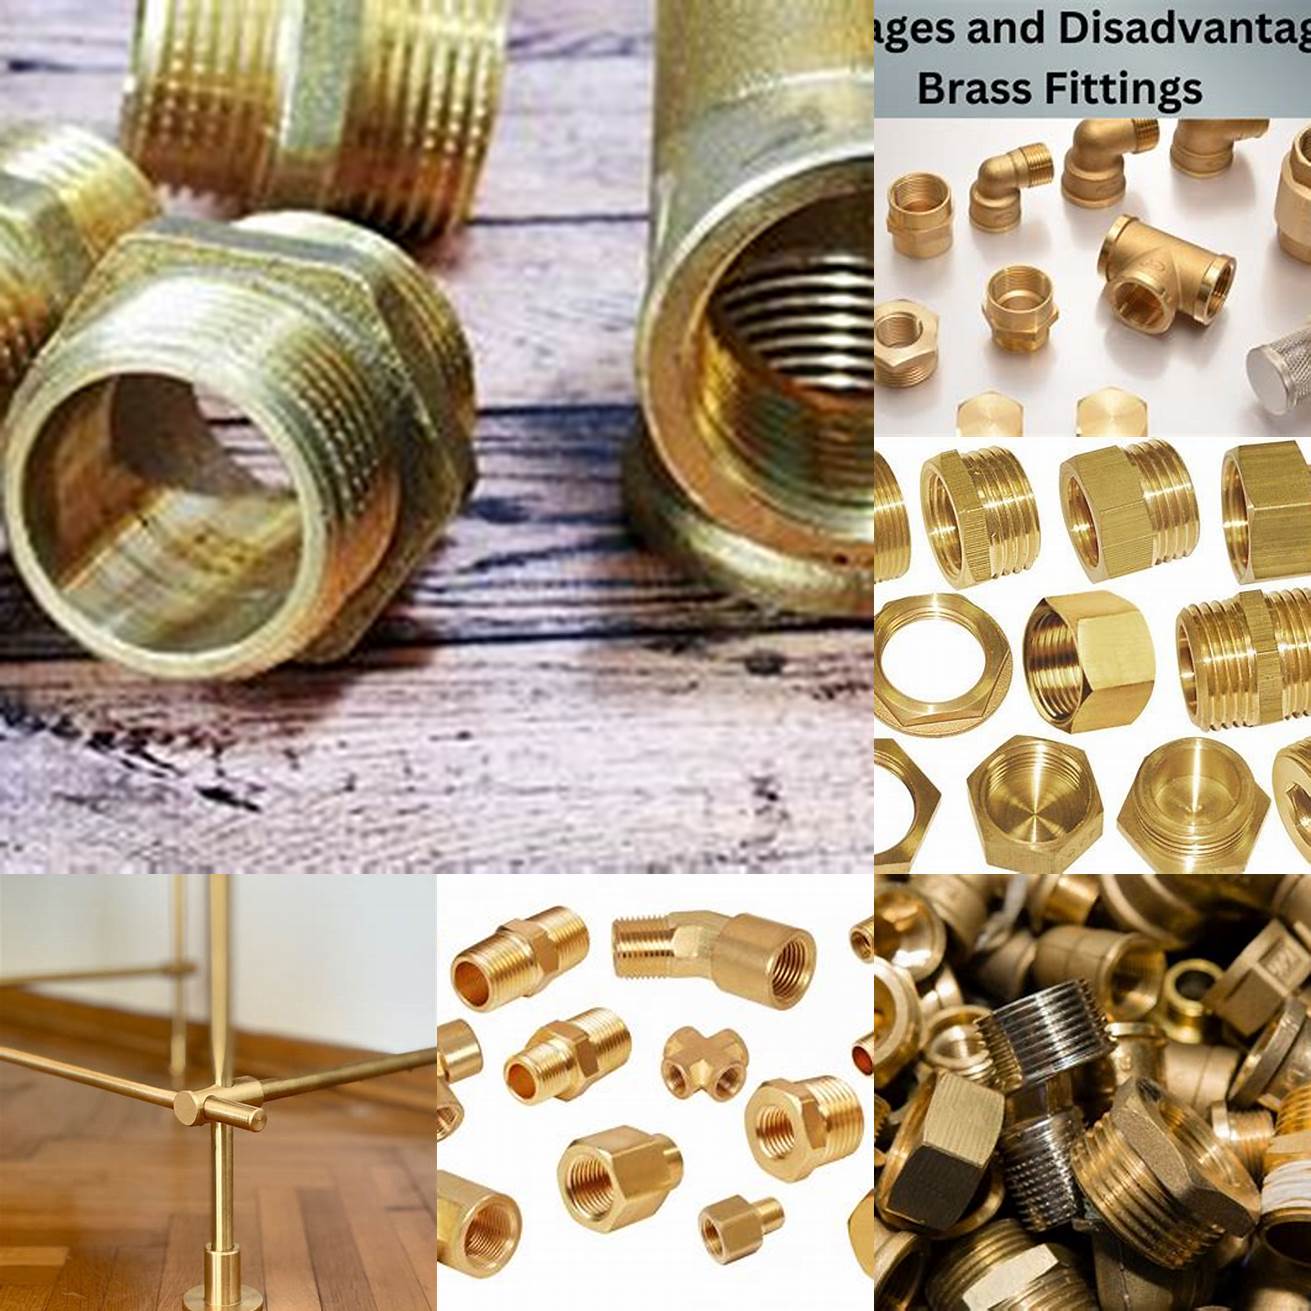 9 Benefits of using brass fittings